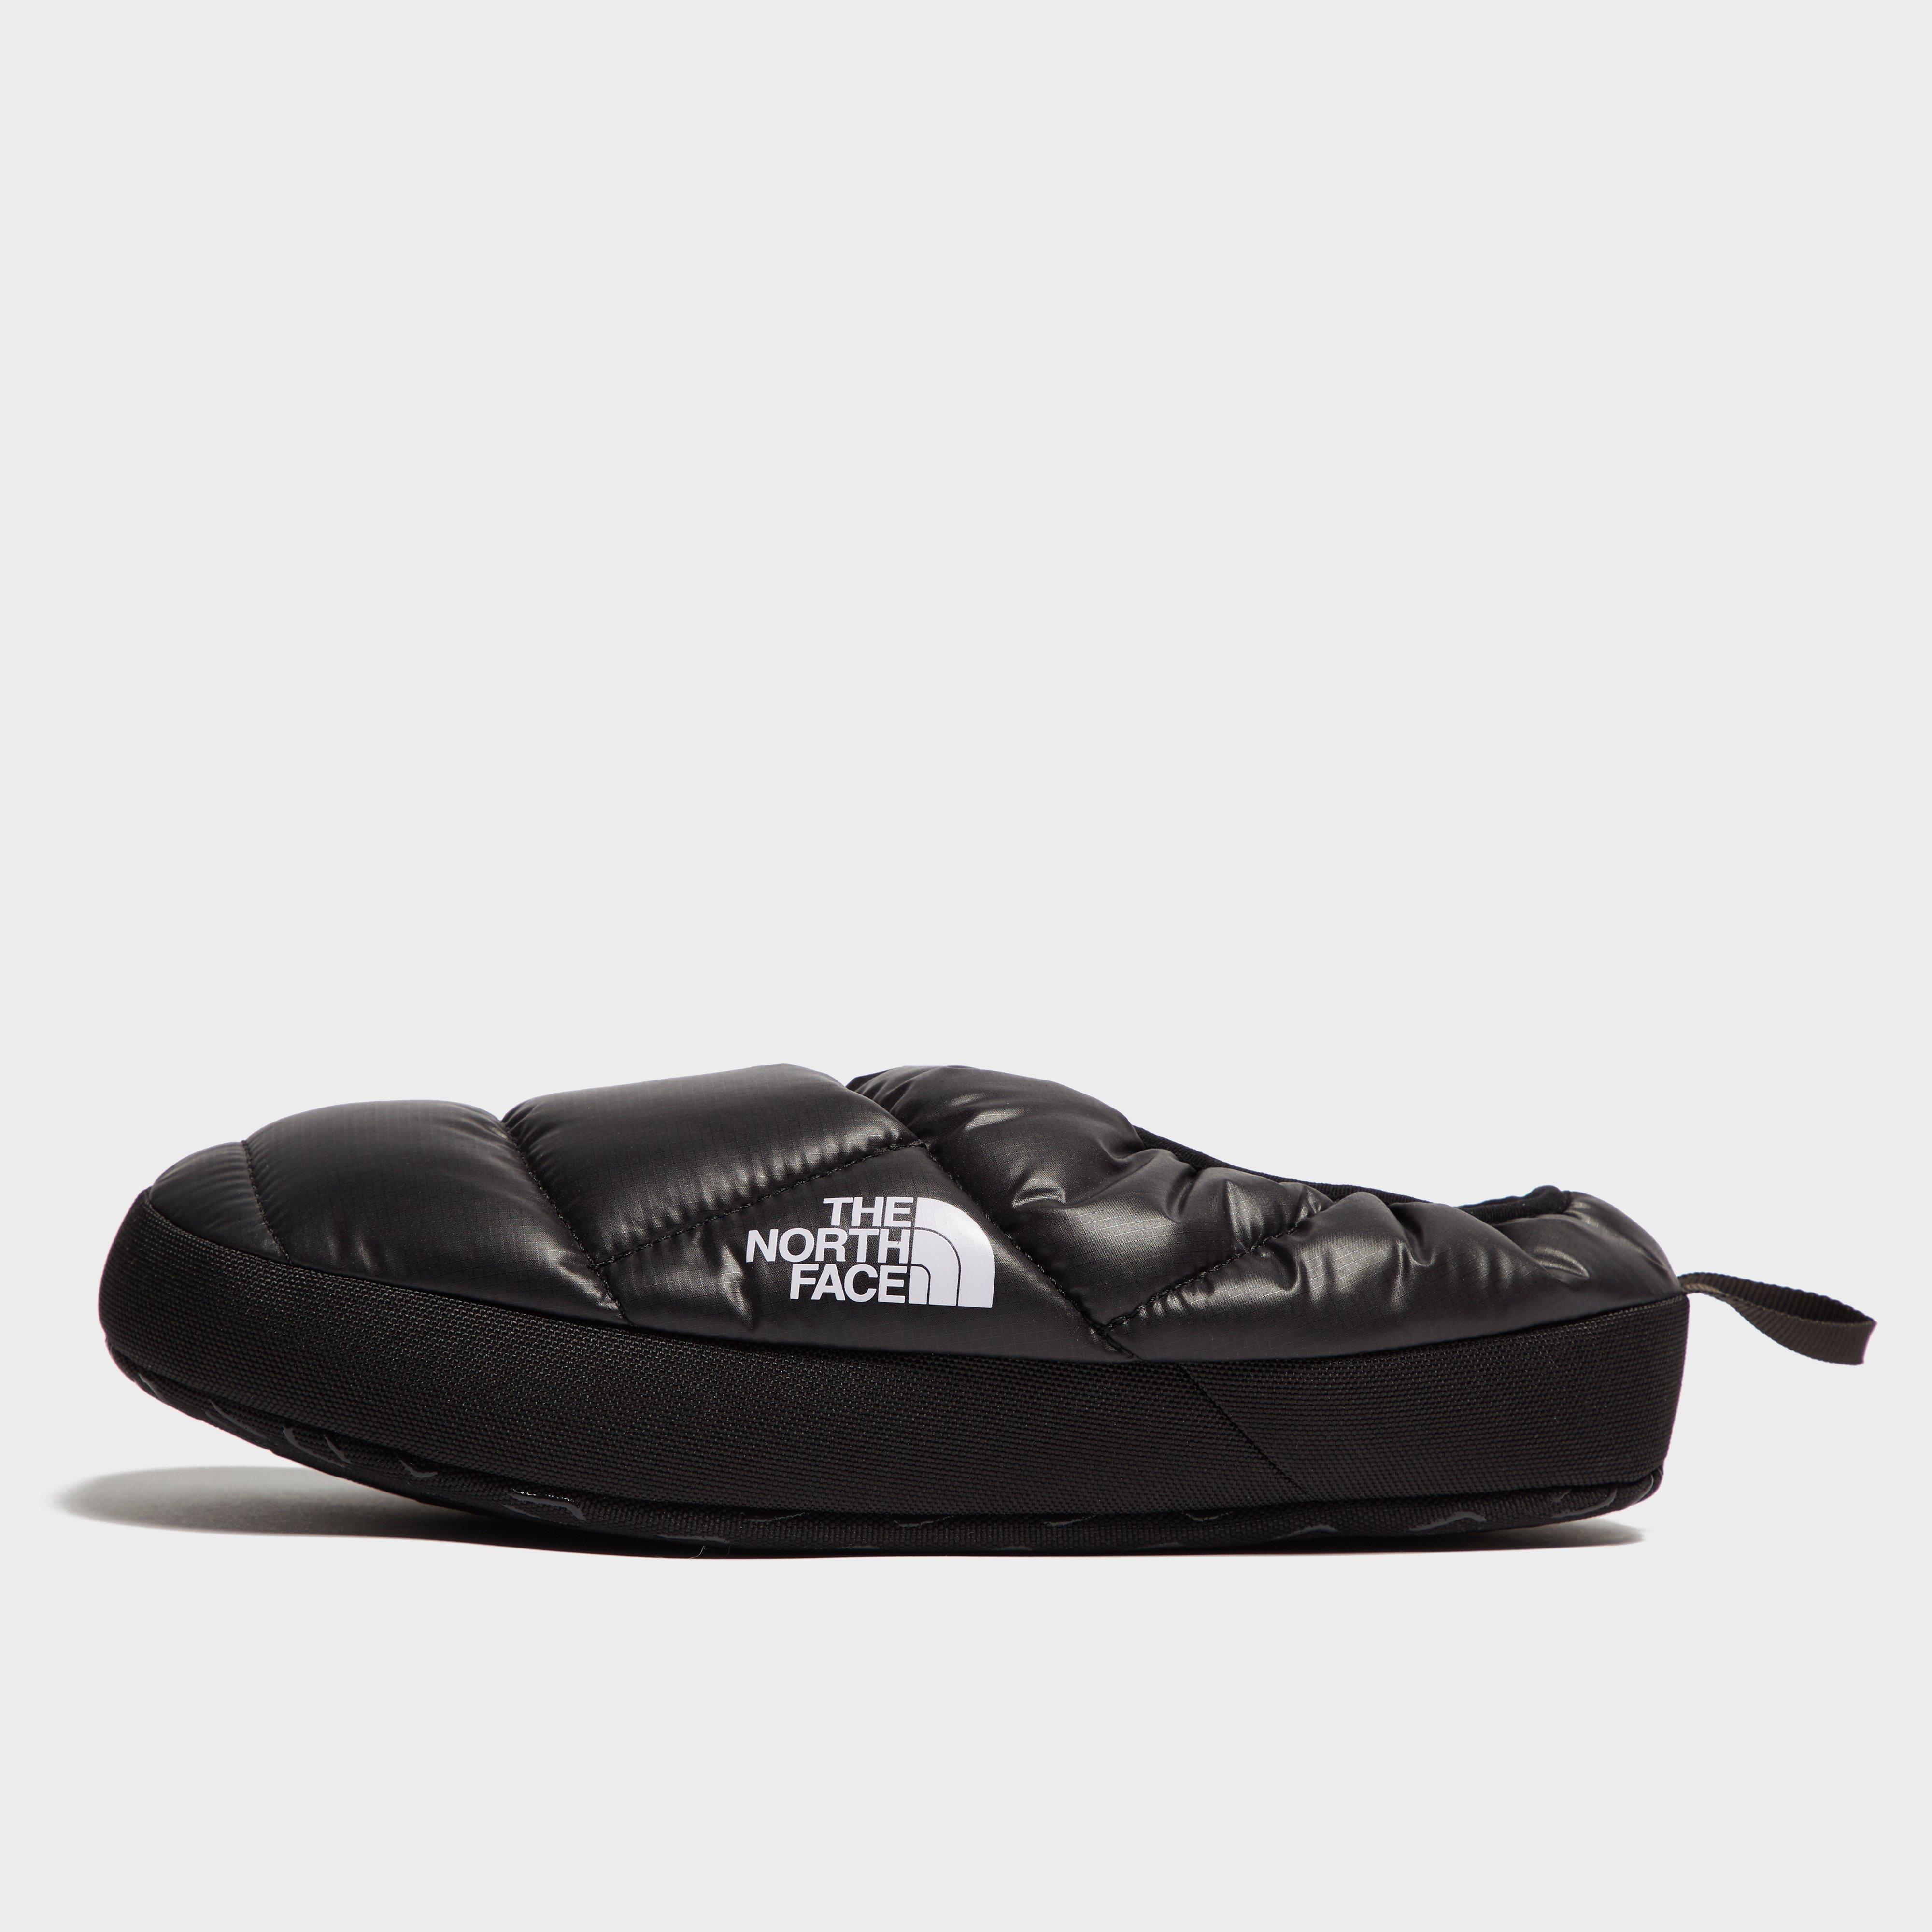 The North Face Men's NSE Tent Mules, Black